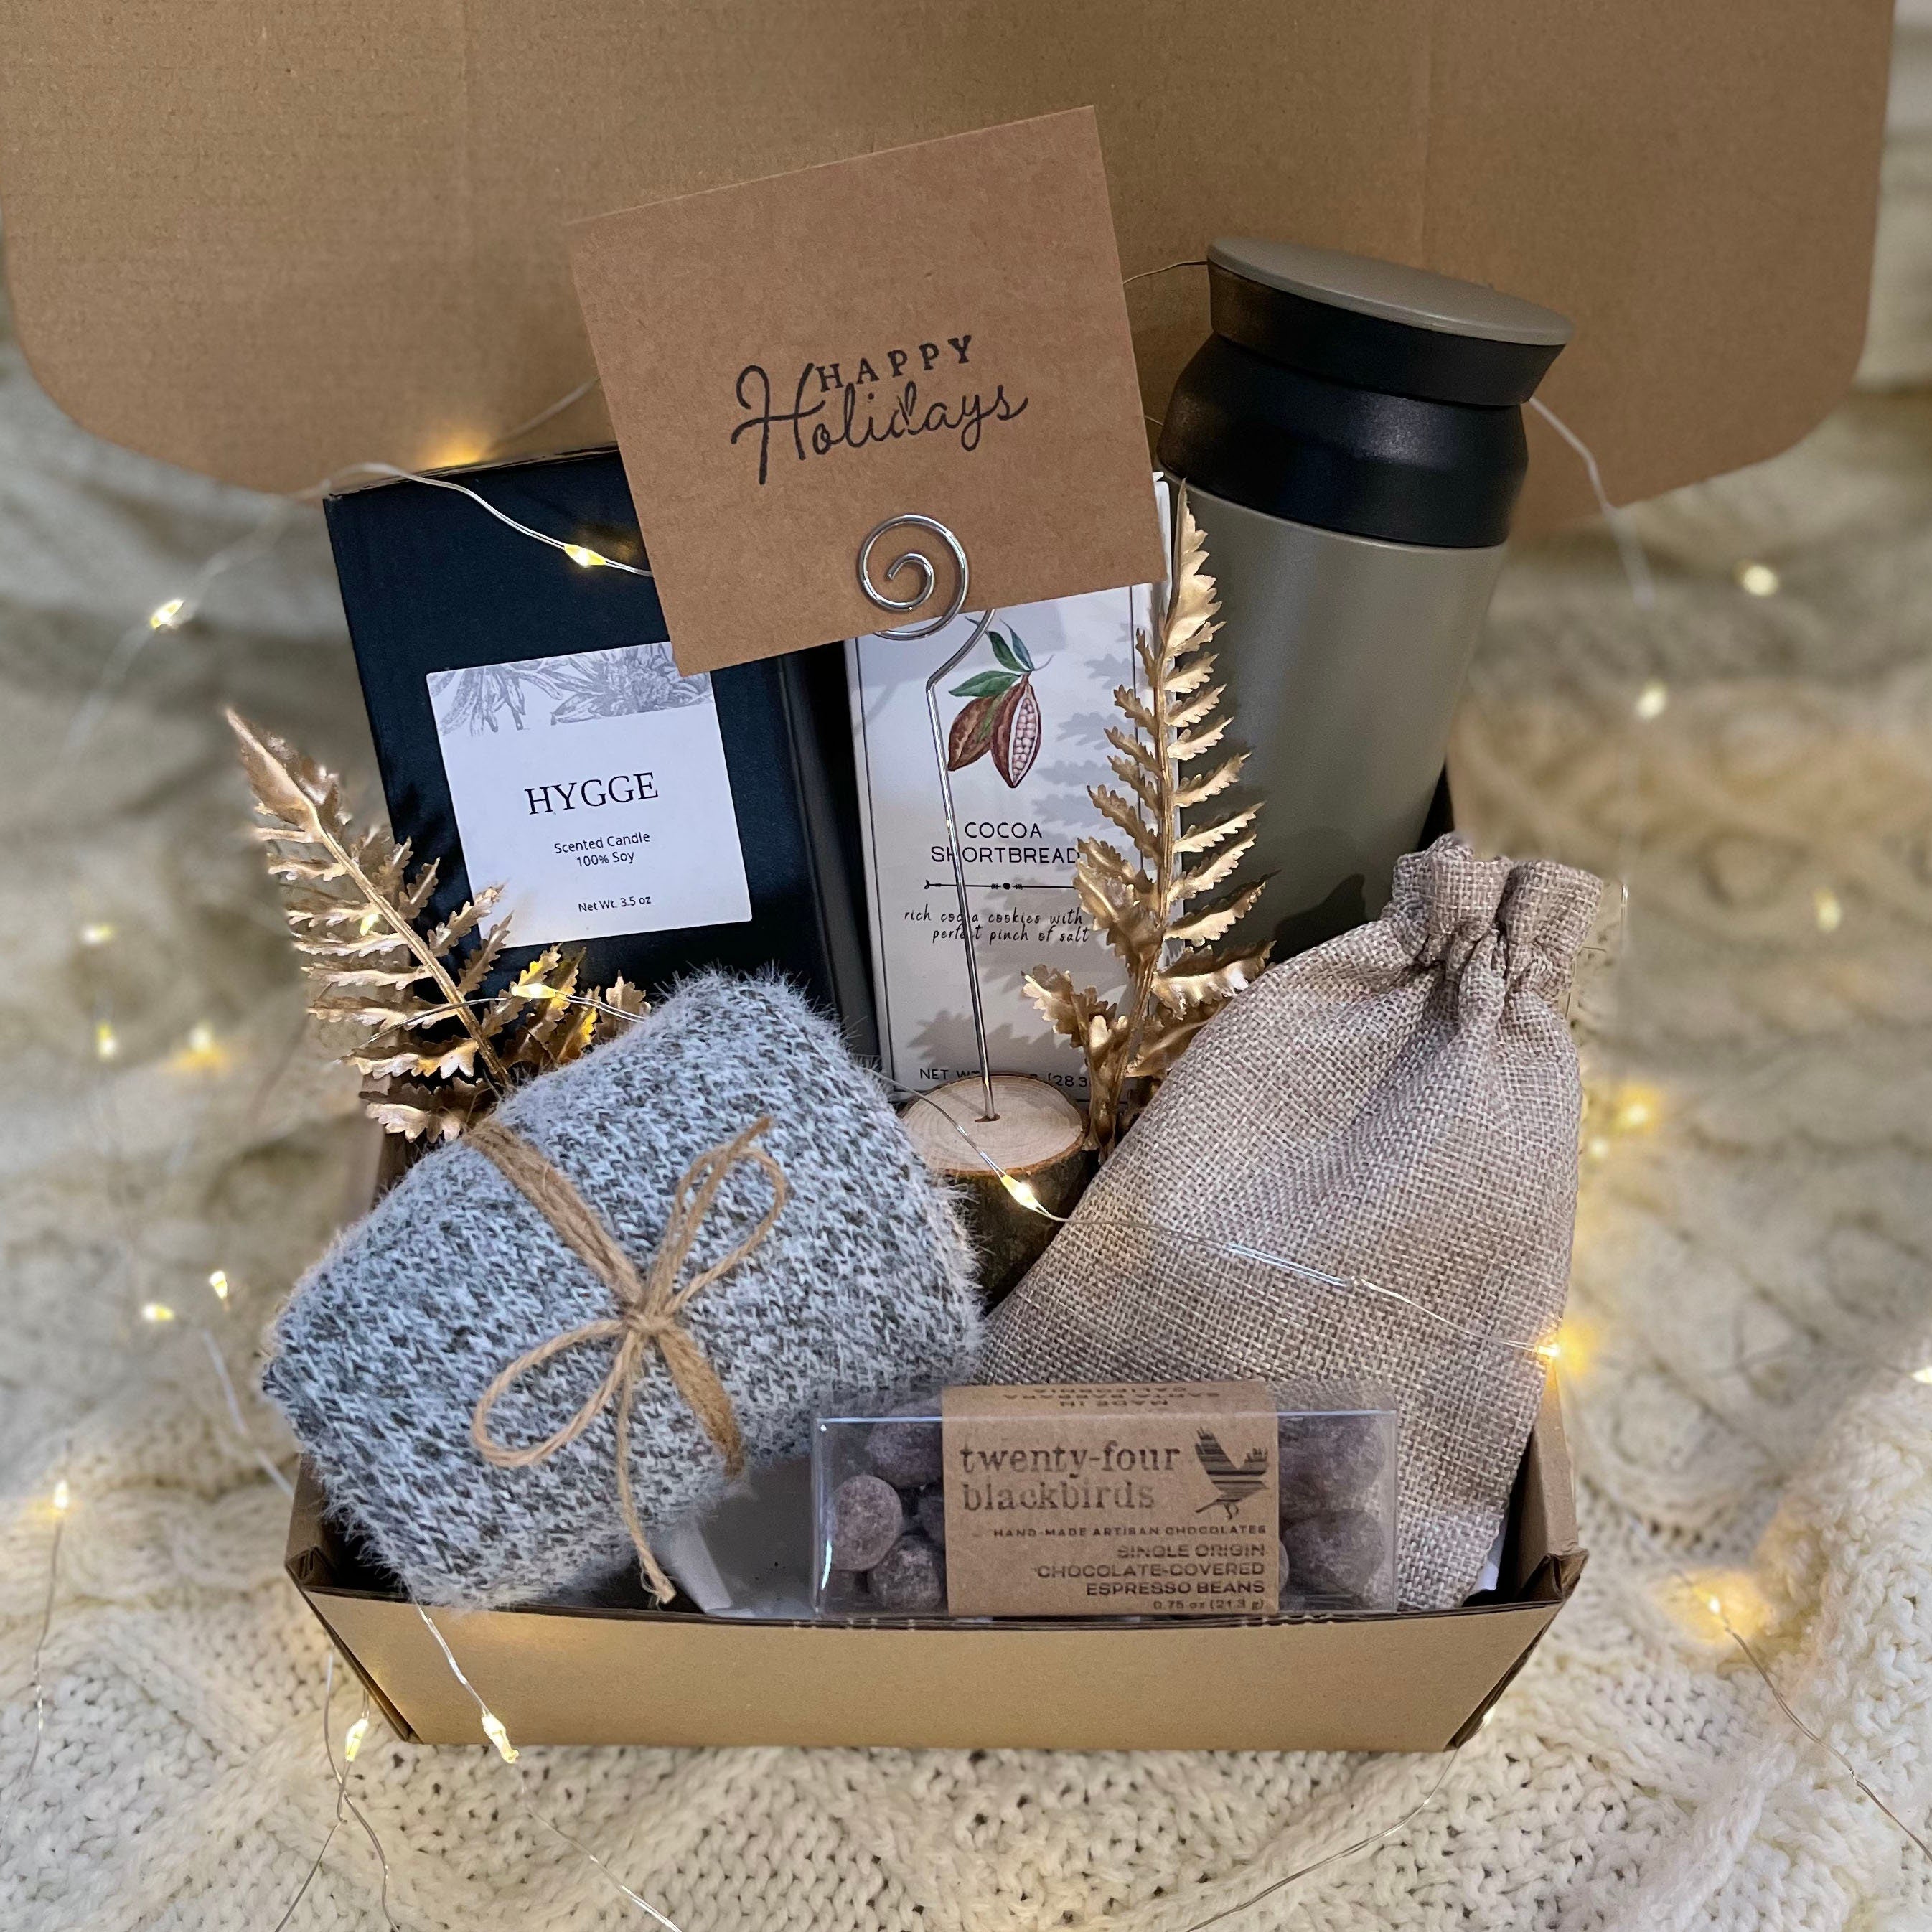 Cozy Winter Gift Box, Christmas Gift Idea, Happy Holidays Gift, Warm Gift  Box, Care Package Gift, Thank You Gift Box, Hygge Gift Basket 